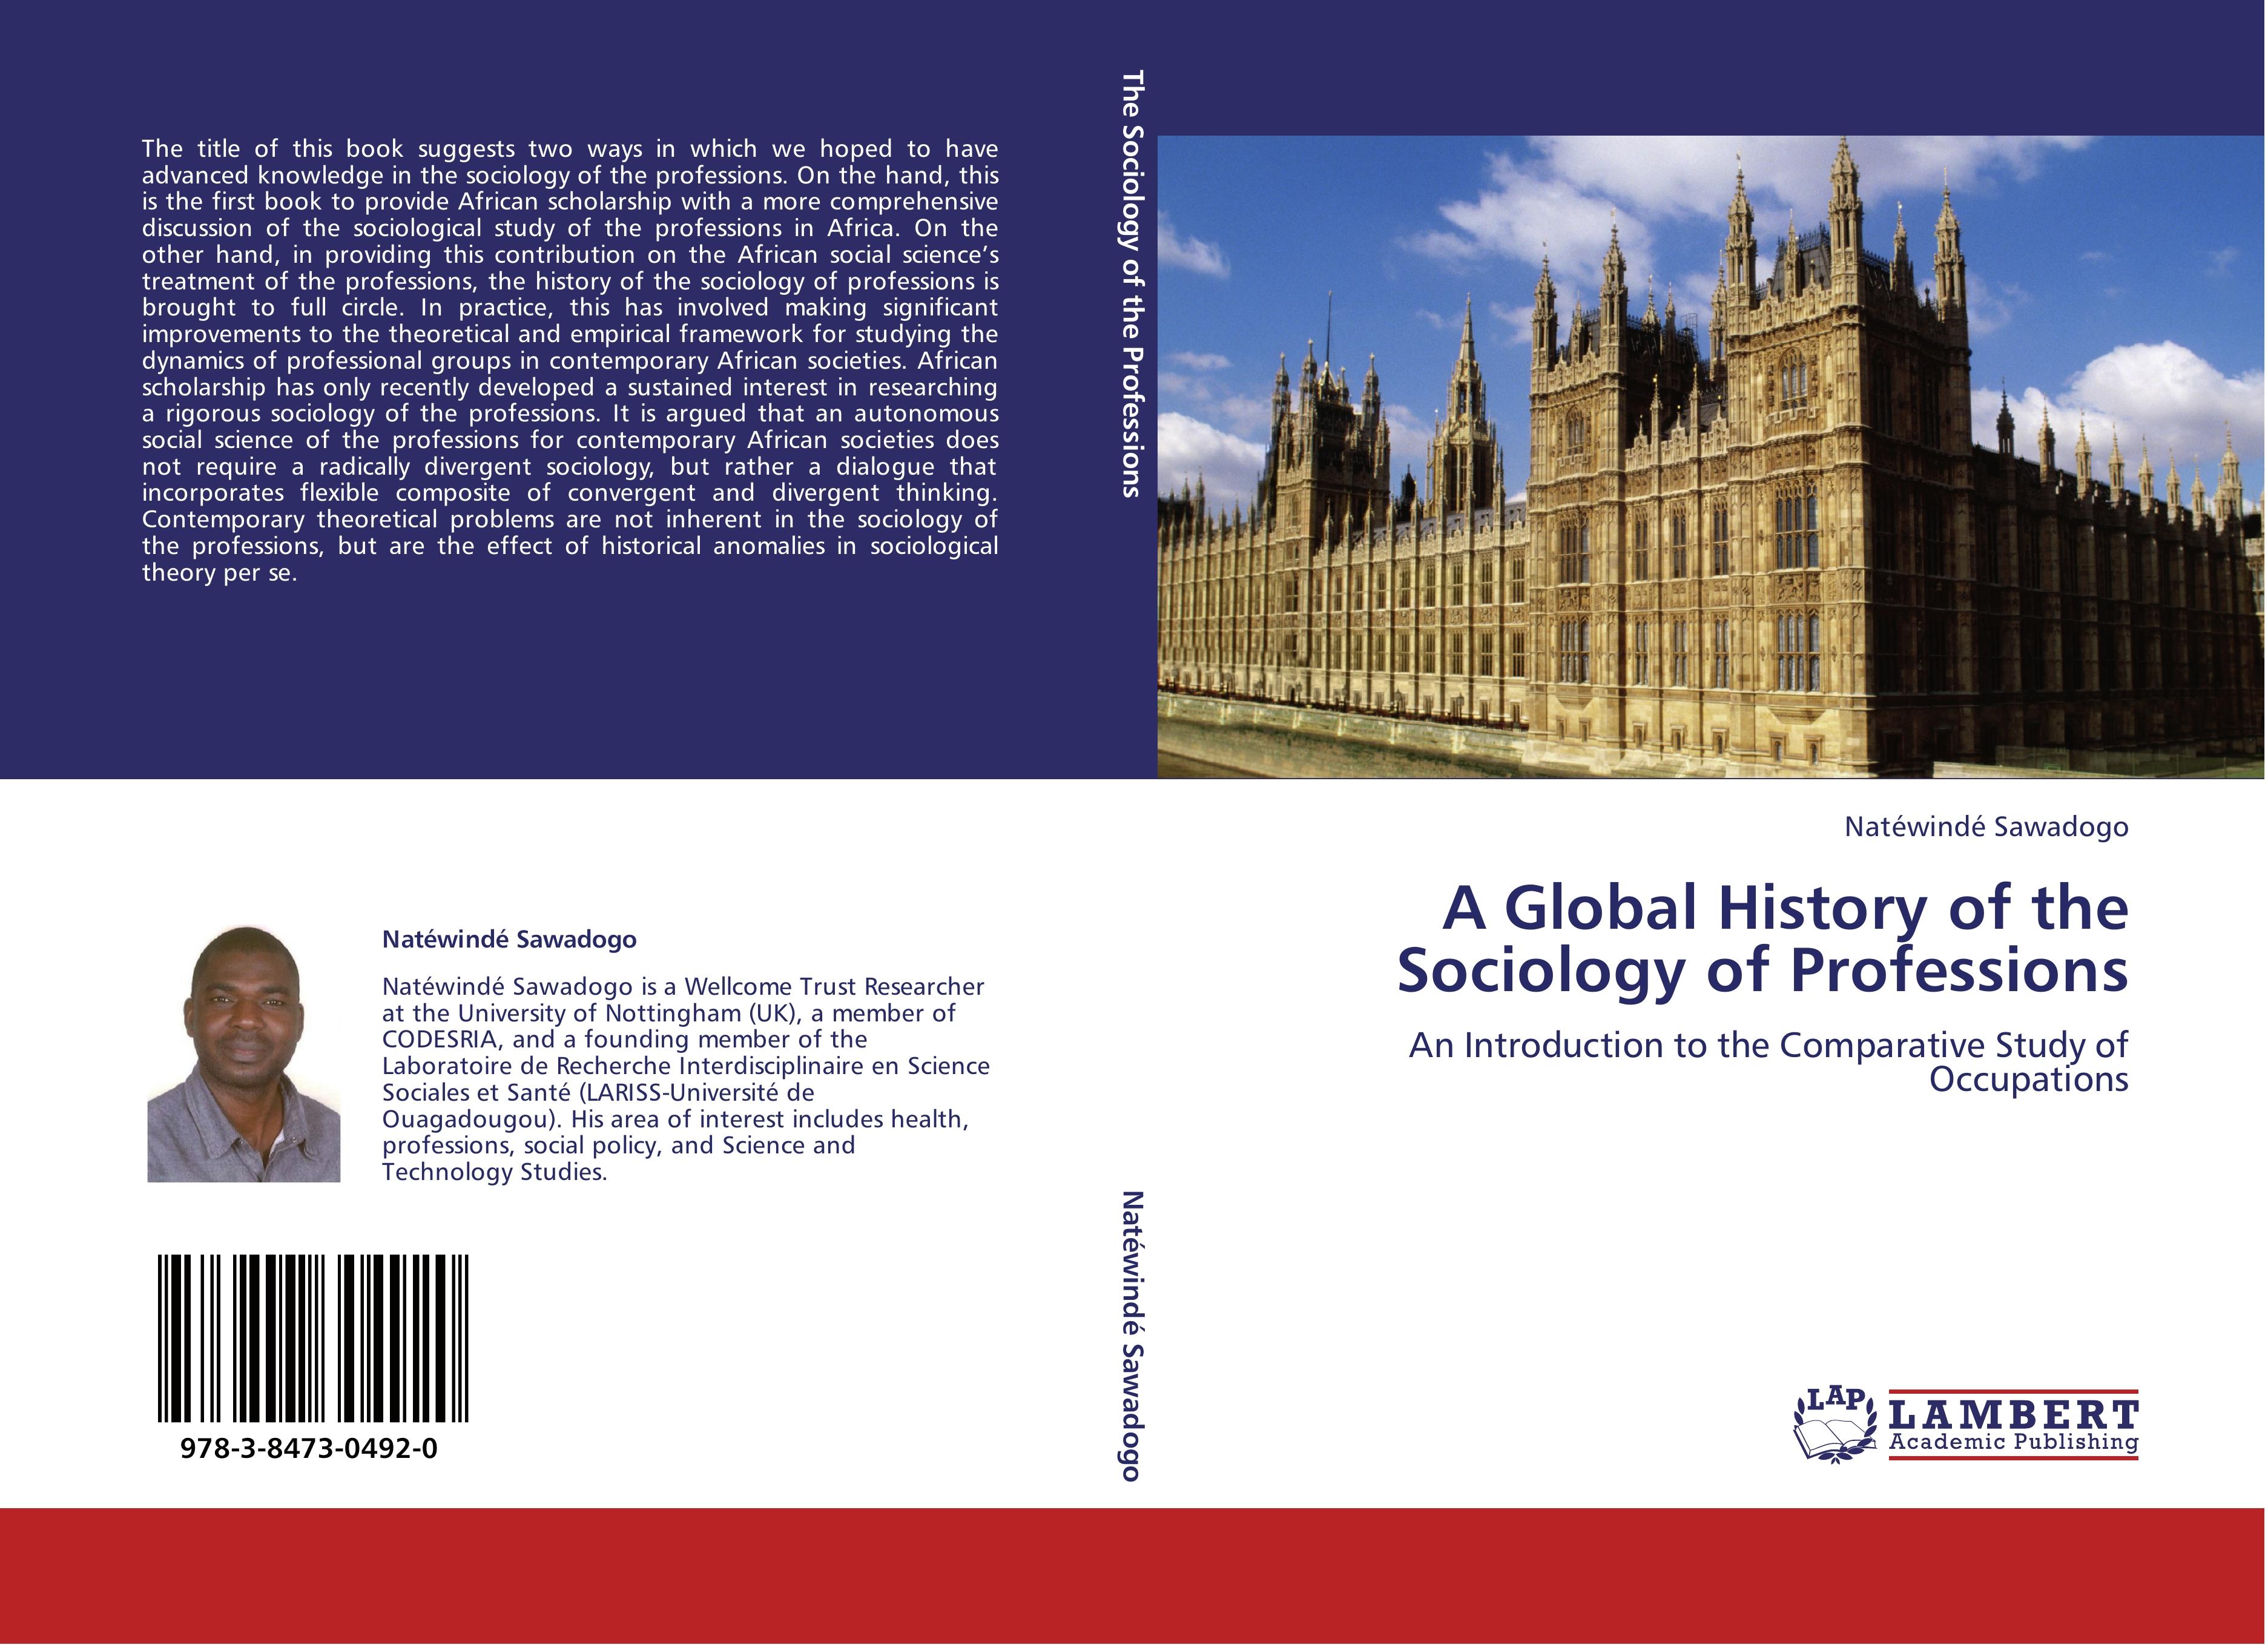 A Global History of the Sociology of Professions | An Introduction to the Comparative Study of Occupations | Natéwindé Sawadogo | Taschenbuch | Paperback | 116 S. | Englisch | 2011 | EAN 9783847304920 - Sawadogo, Natéwindé